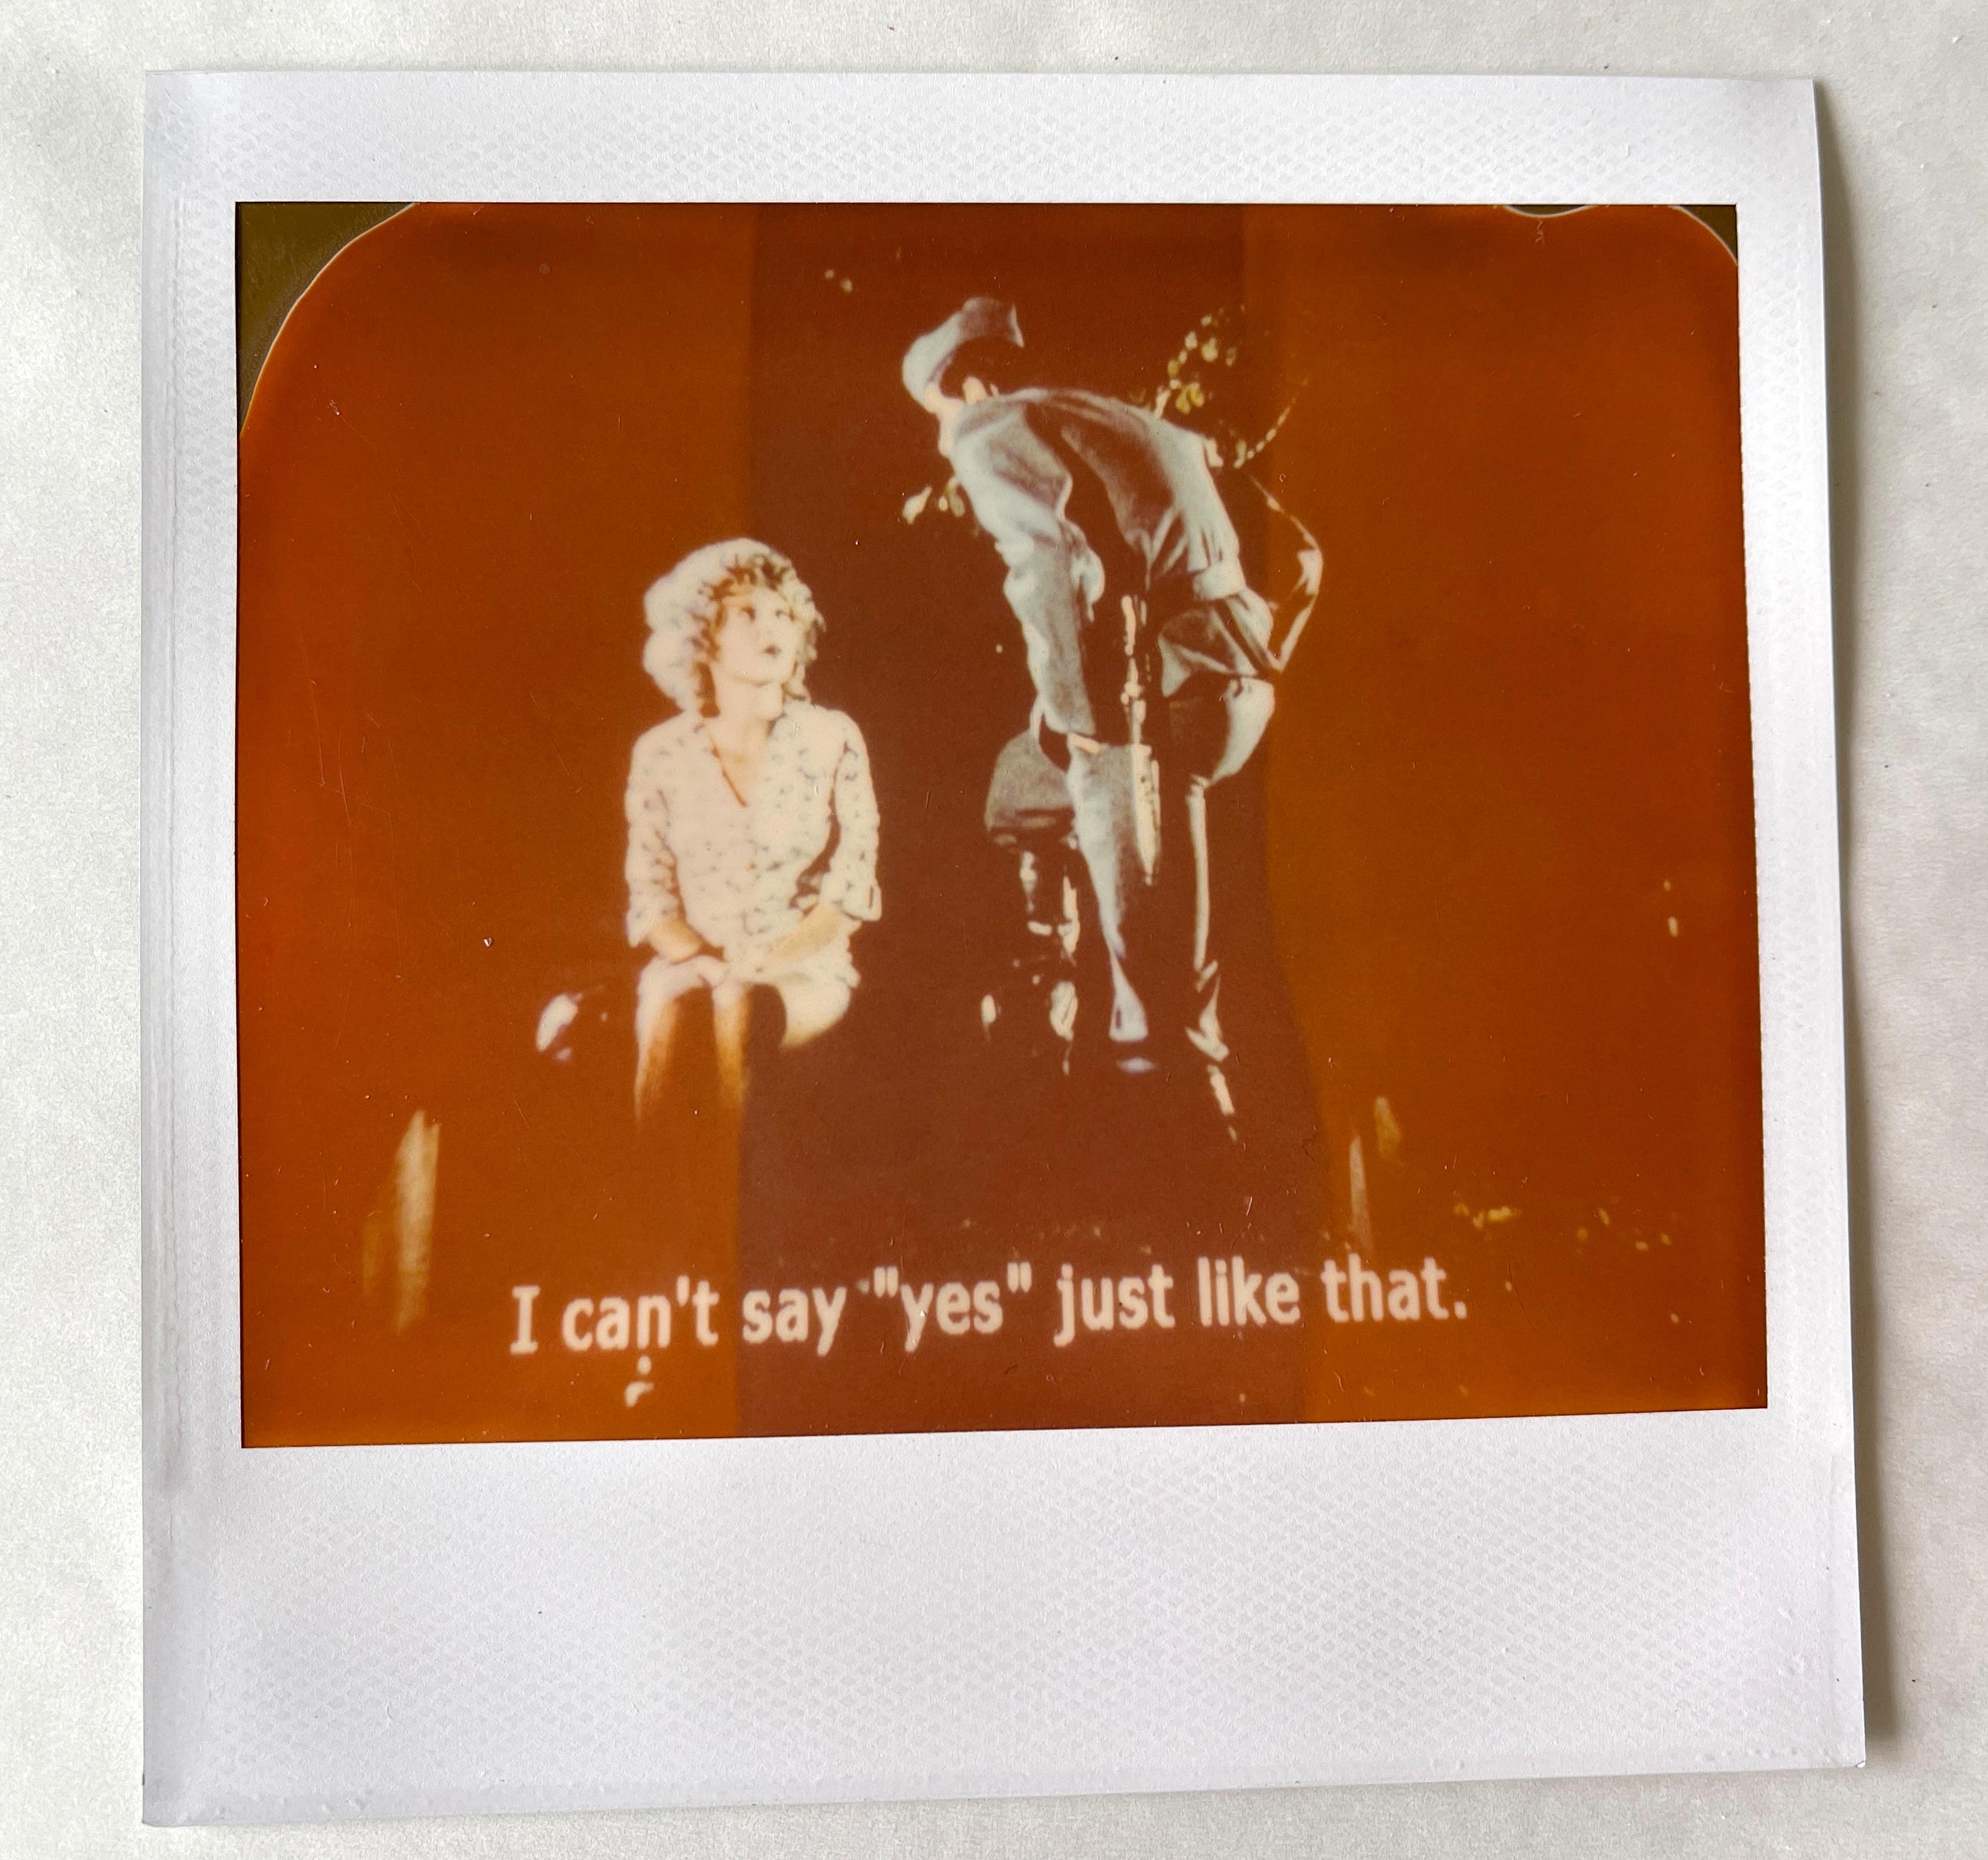 Stefanie Schneider Color Photograph - I can't say "yes" just like that (Stranger than Paradise) - Original Polaroid